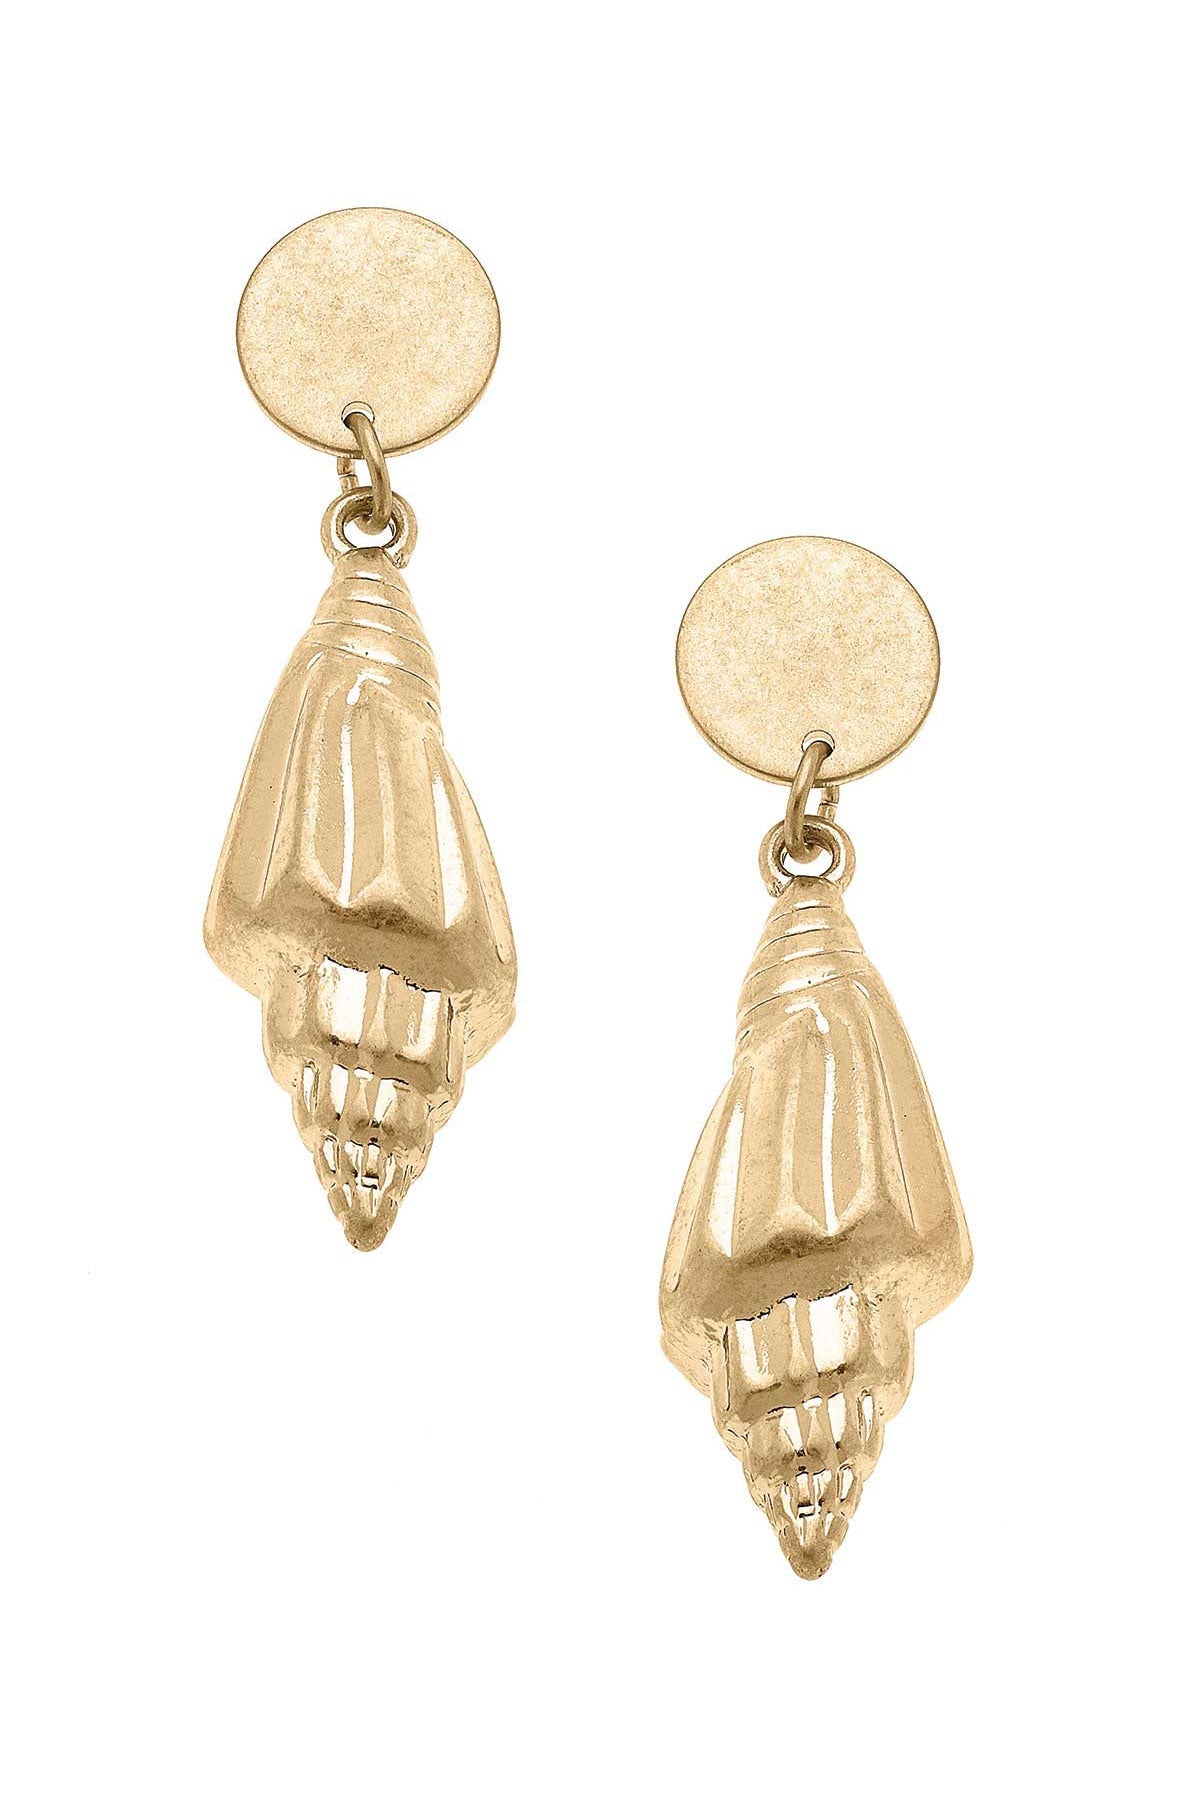 Spiral Shell Statement Earrings in Worn Gold